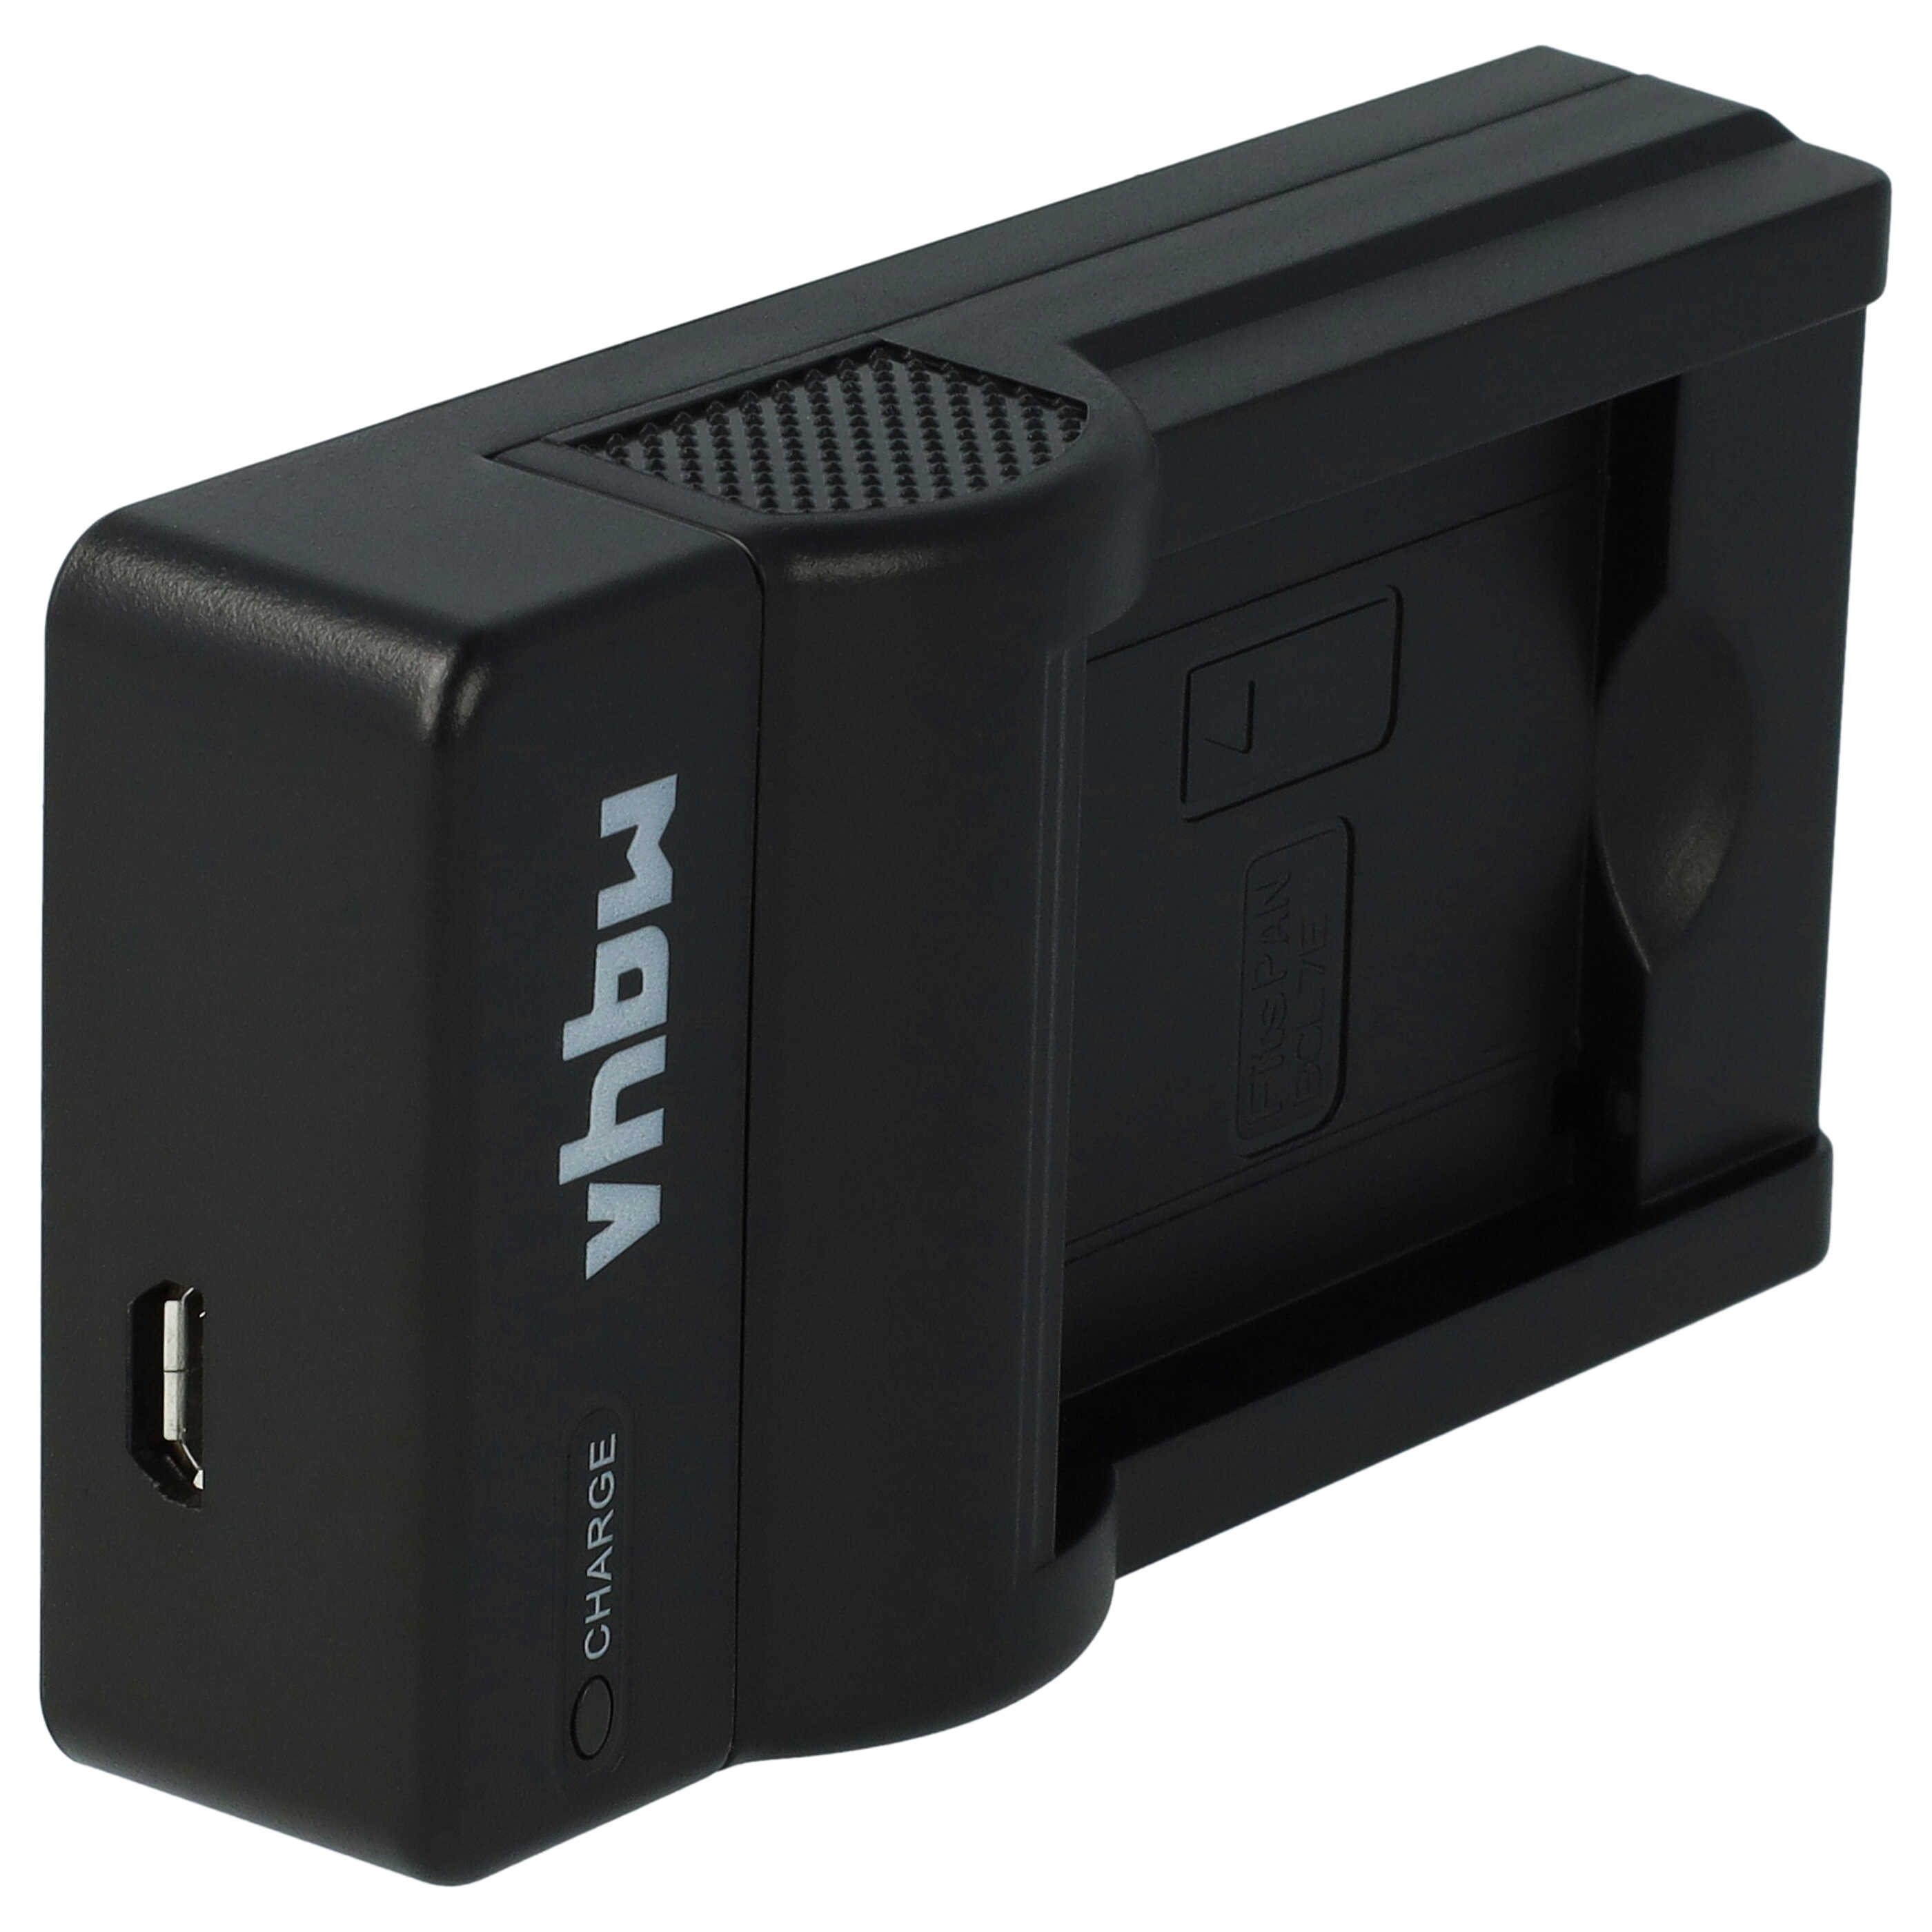 Battery Charger suitable for Lumix DMC-F5 Camera etc. - 0.5 A, 4.2 V